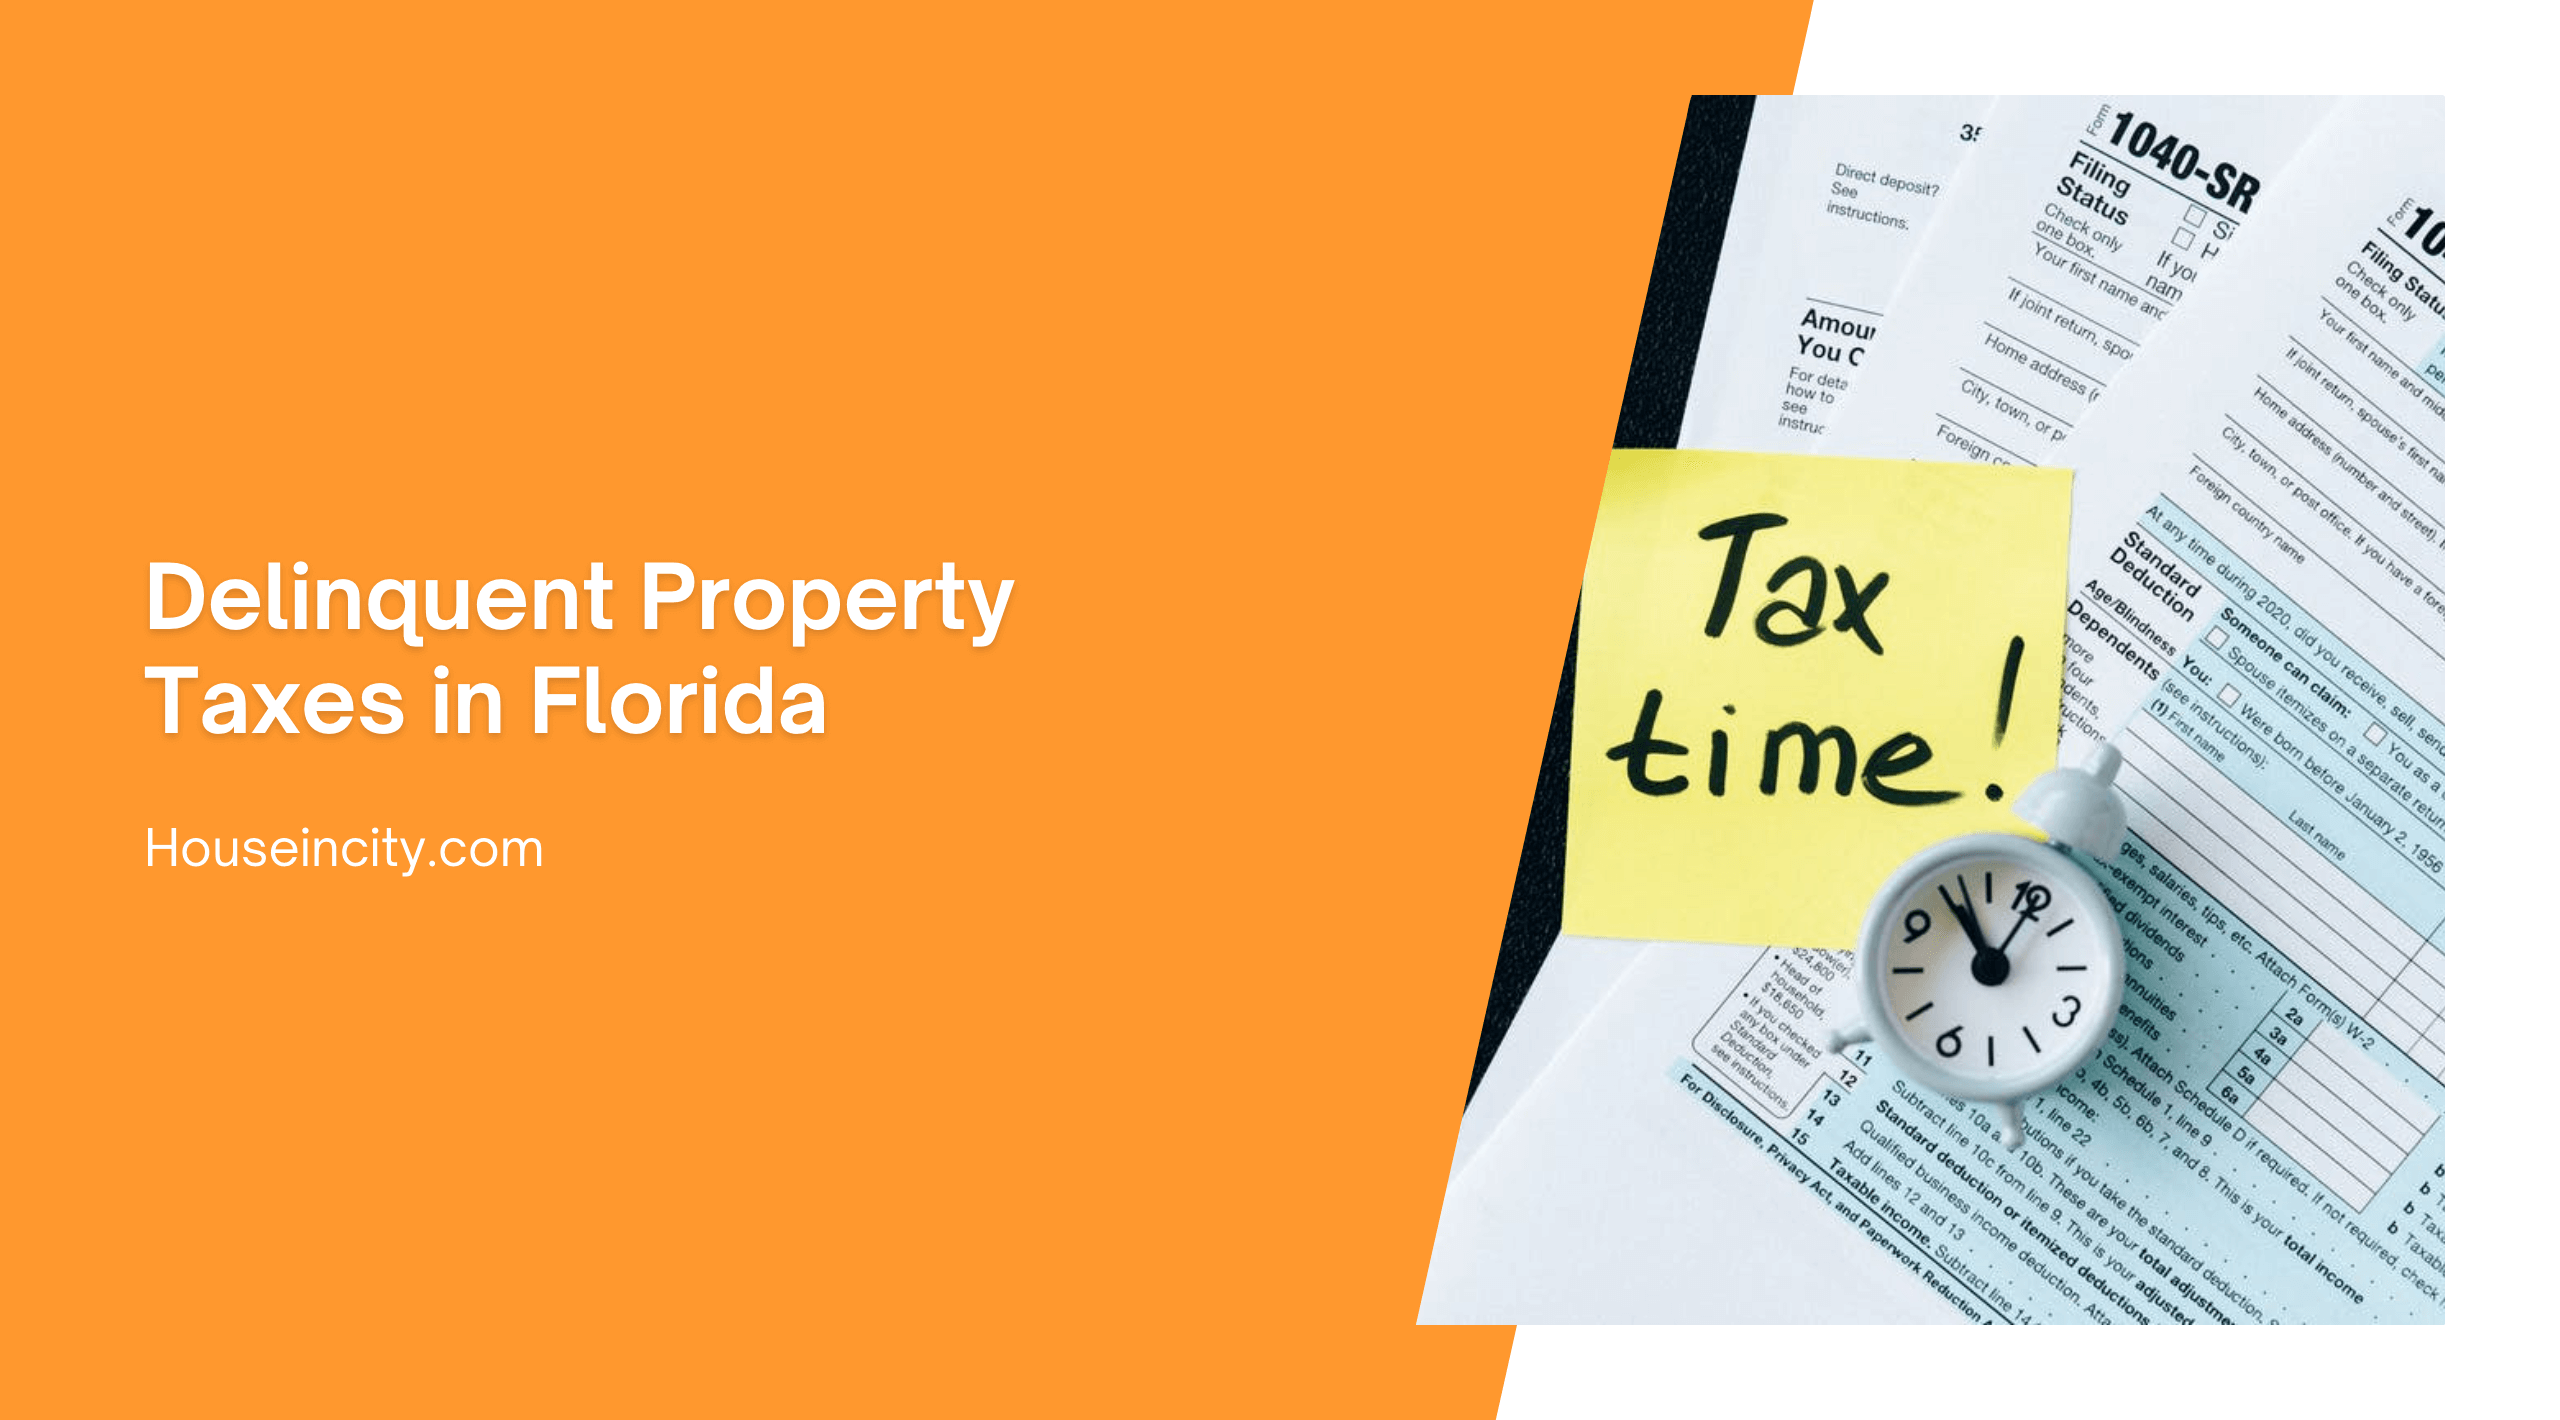 Delinquent Property Taxes in Florida